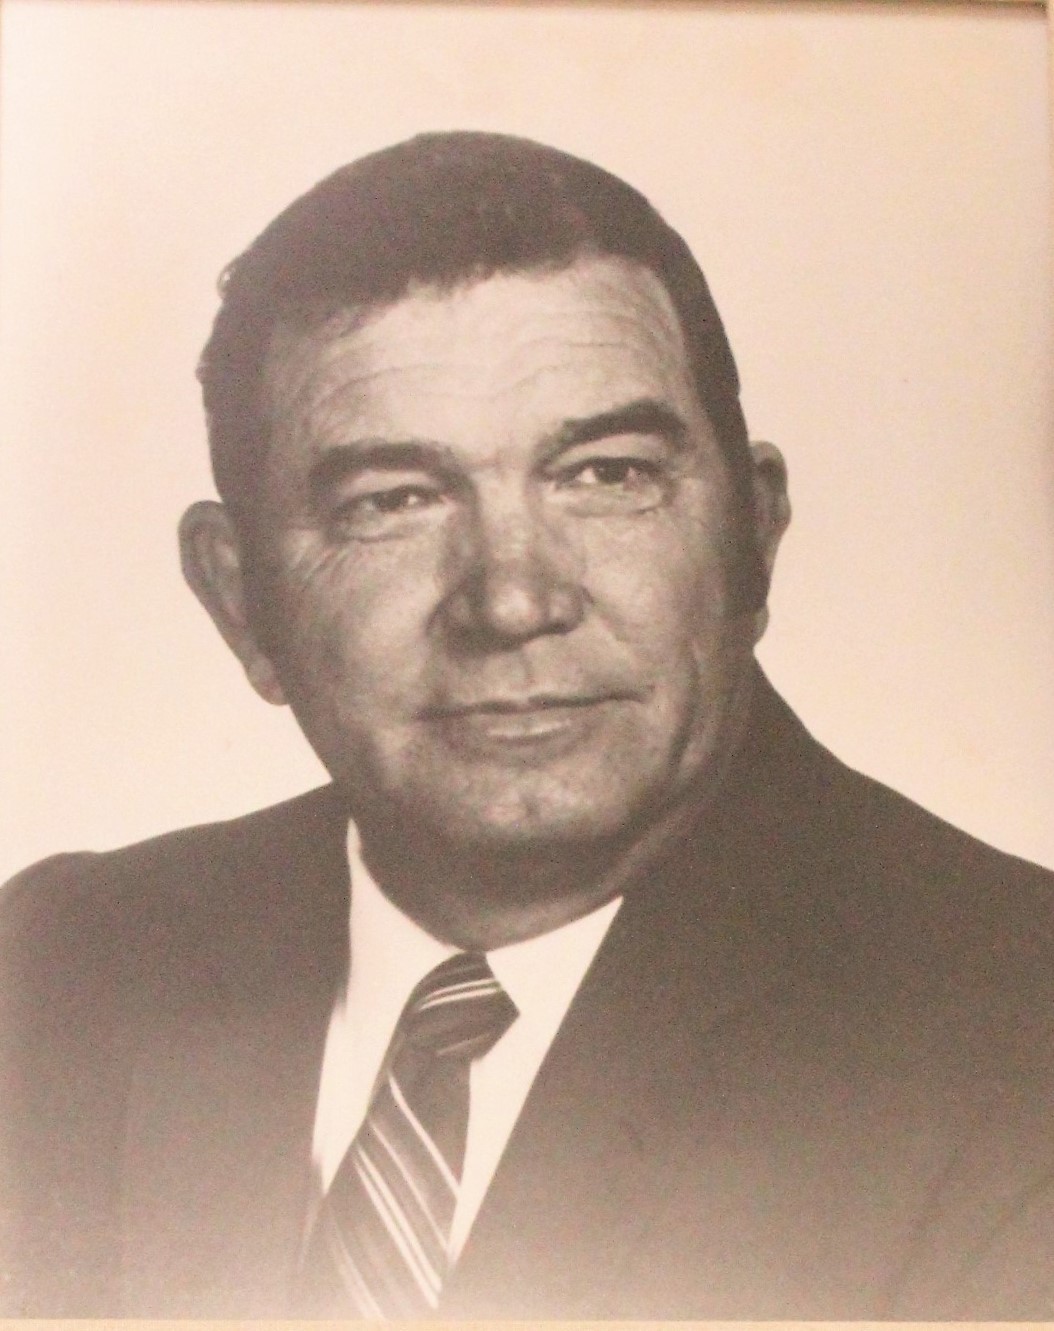 The Senior Center in Robertsdale, built in 1986 was dedicated in honor of former mayor George “Pervy” Thames in 1991.